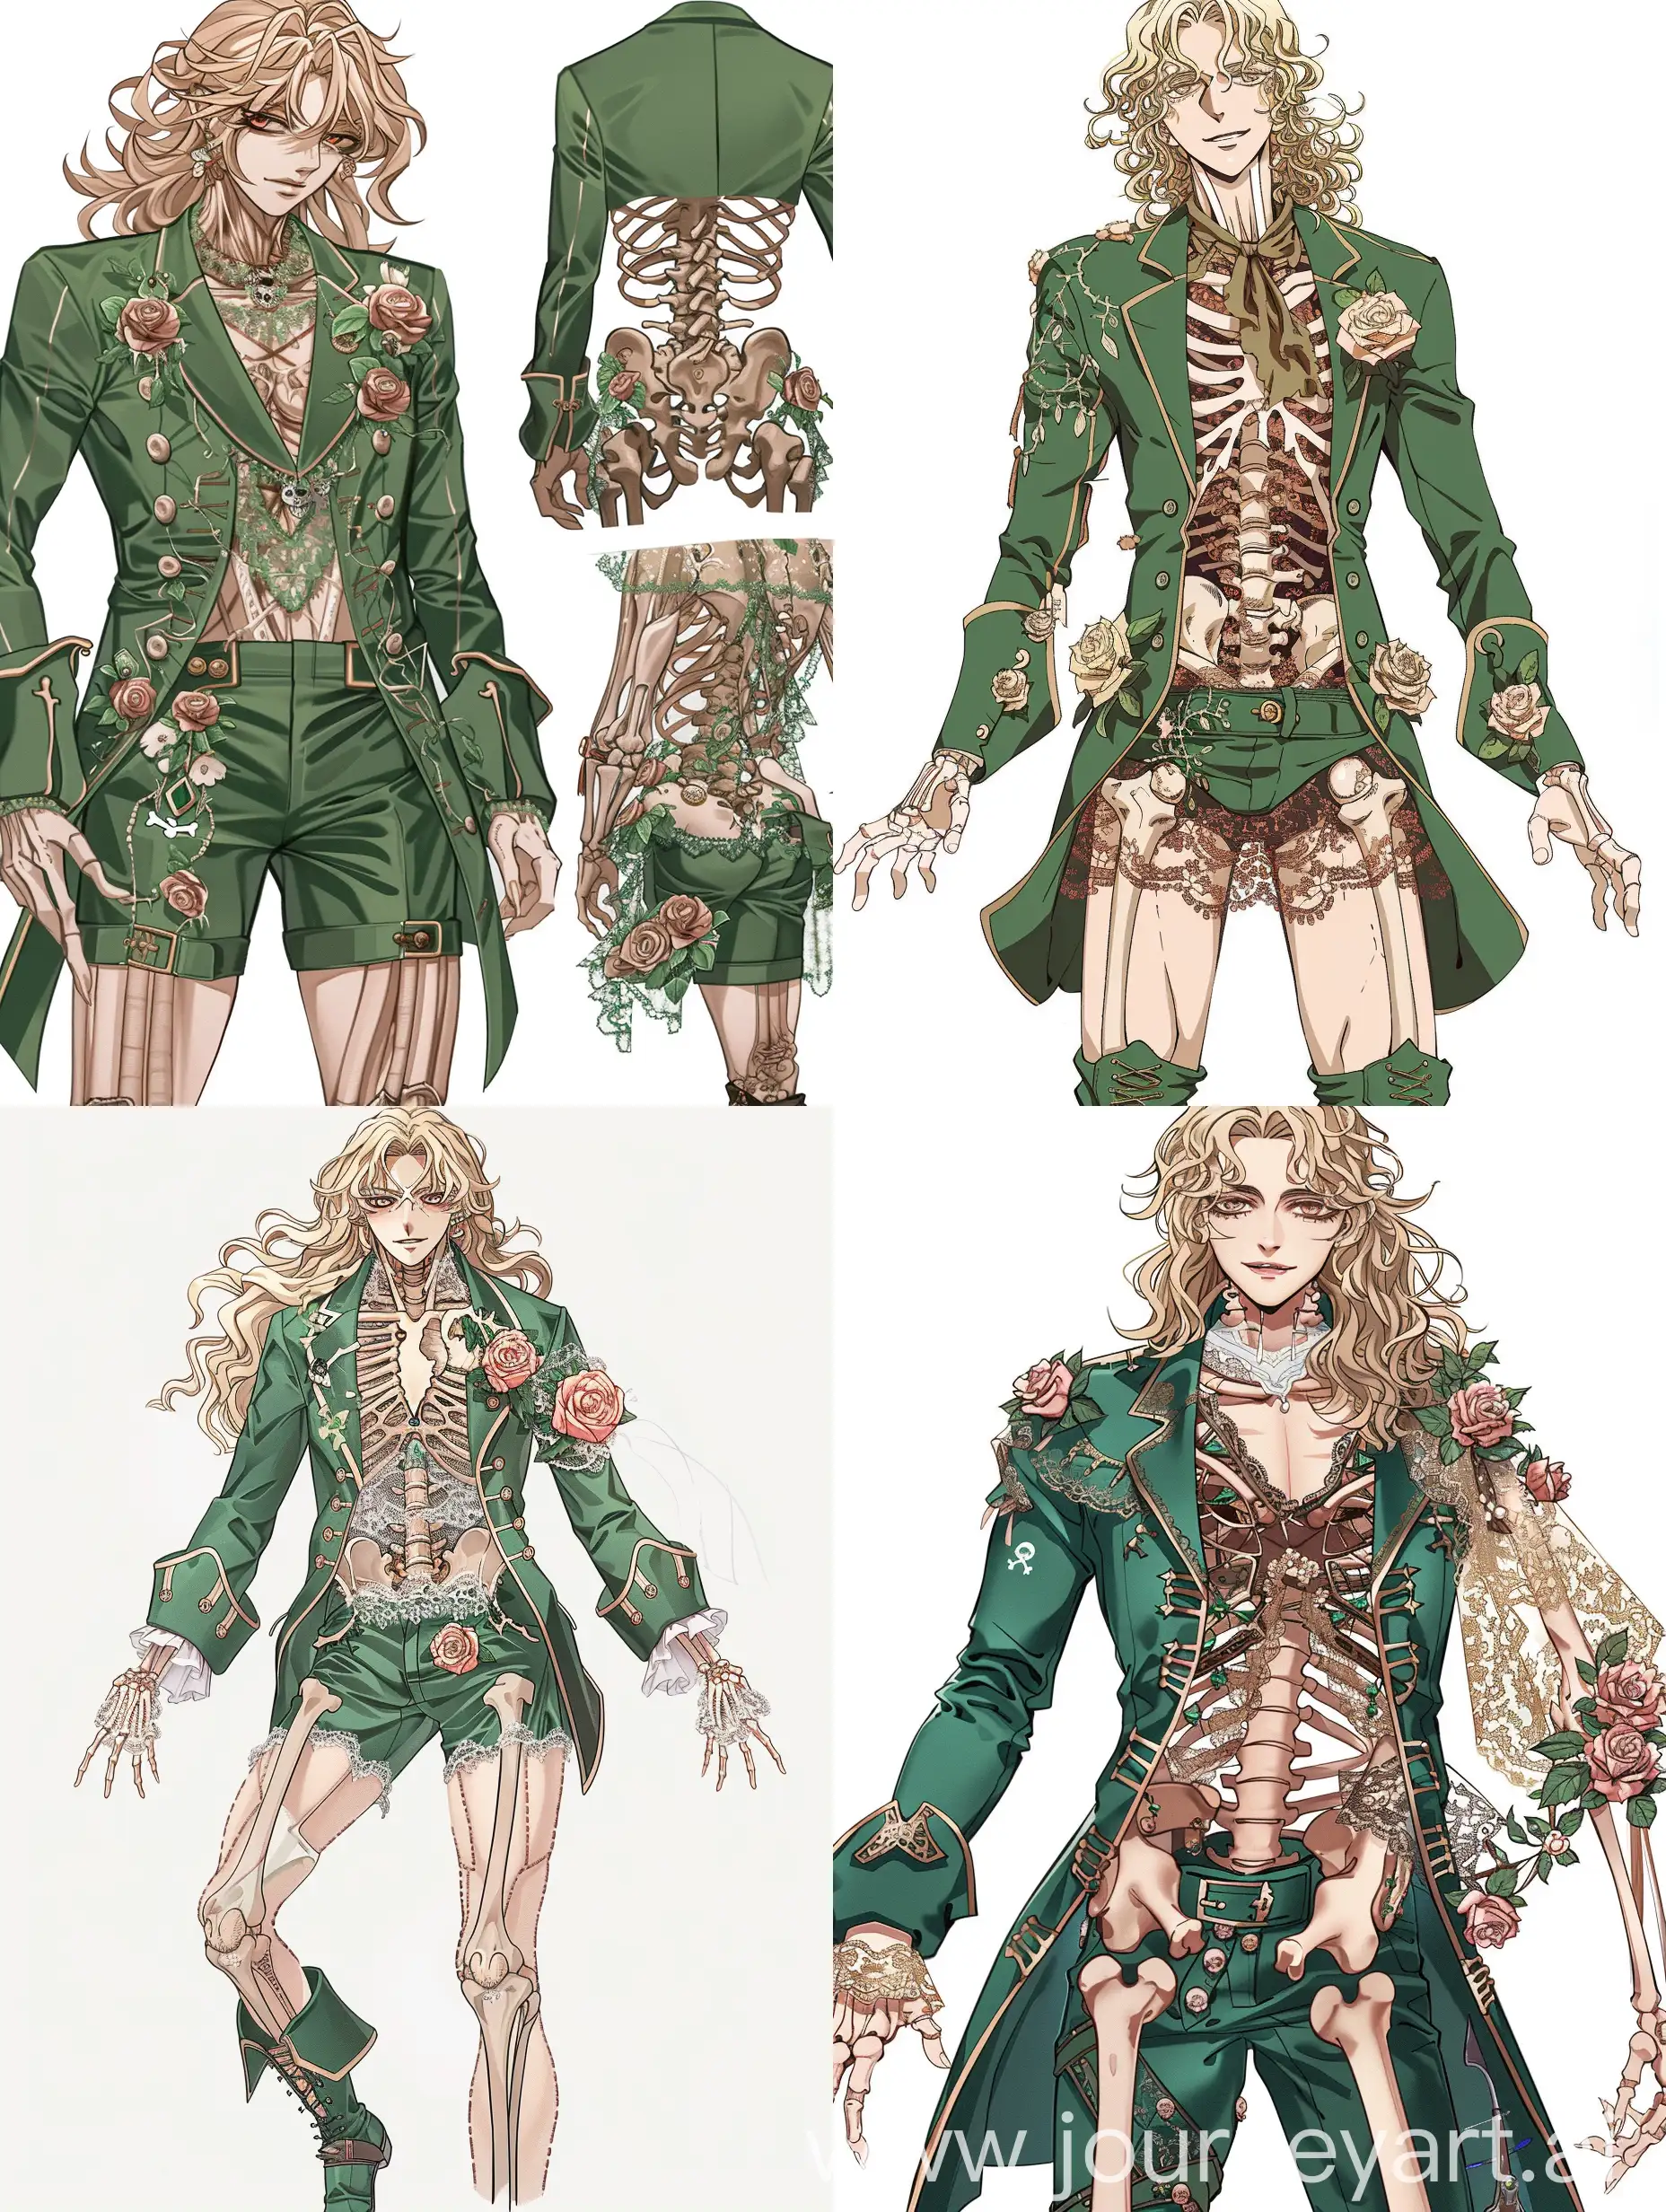 mature man, anime style, broad shoulders, blond wavy hair, one eye white, the other eye brown, pirate green suit, roses on clothes, lace, body made of bones and ribs, knee-length shorts, boots, full growth, multiple views